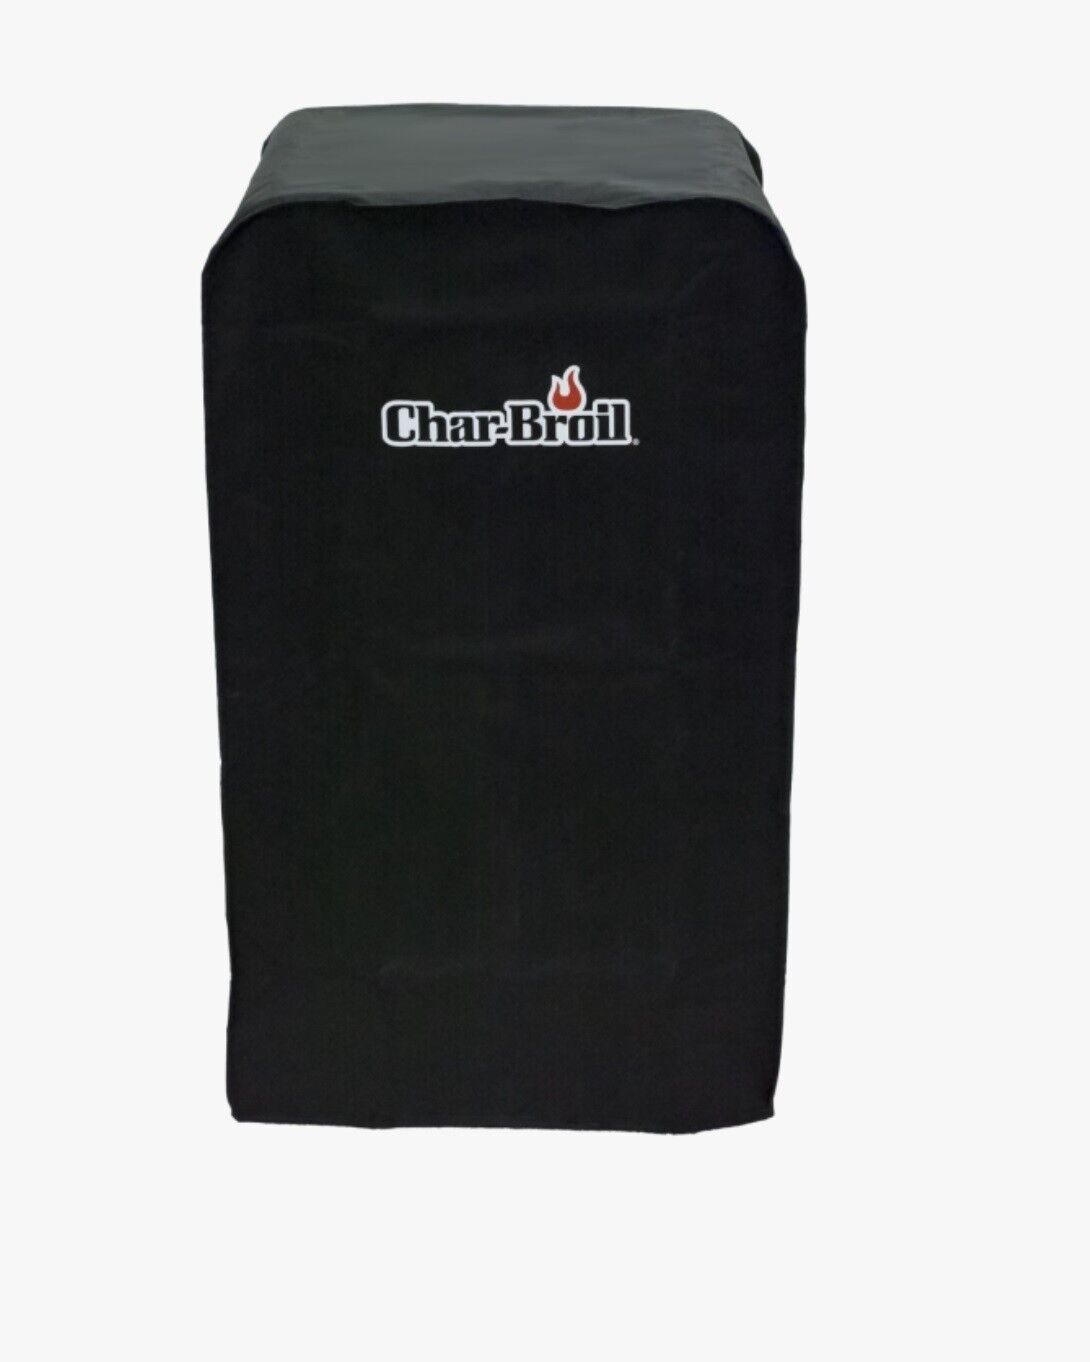 Digital Electric Smoker Cover 30 inch - $24.25